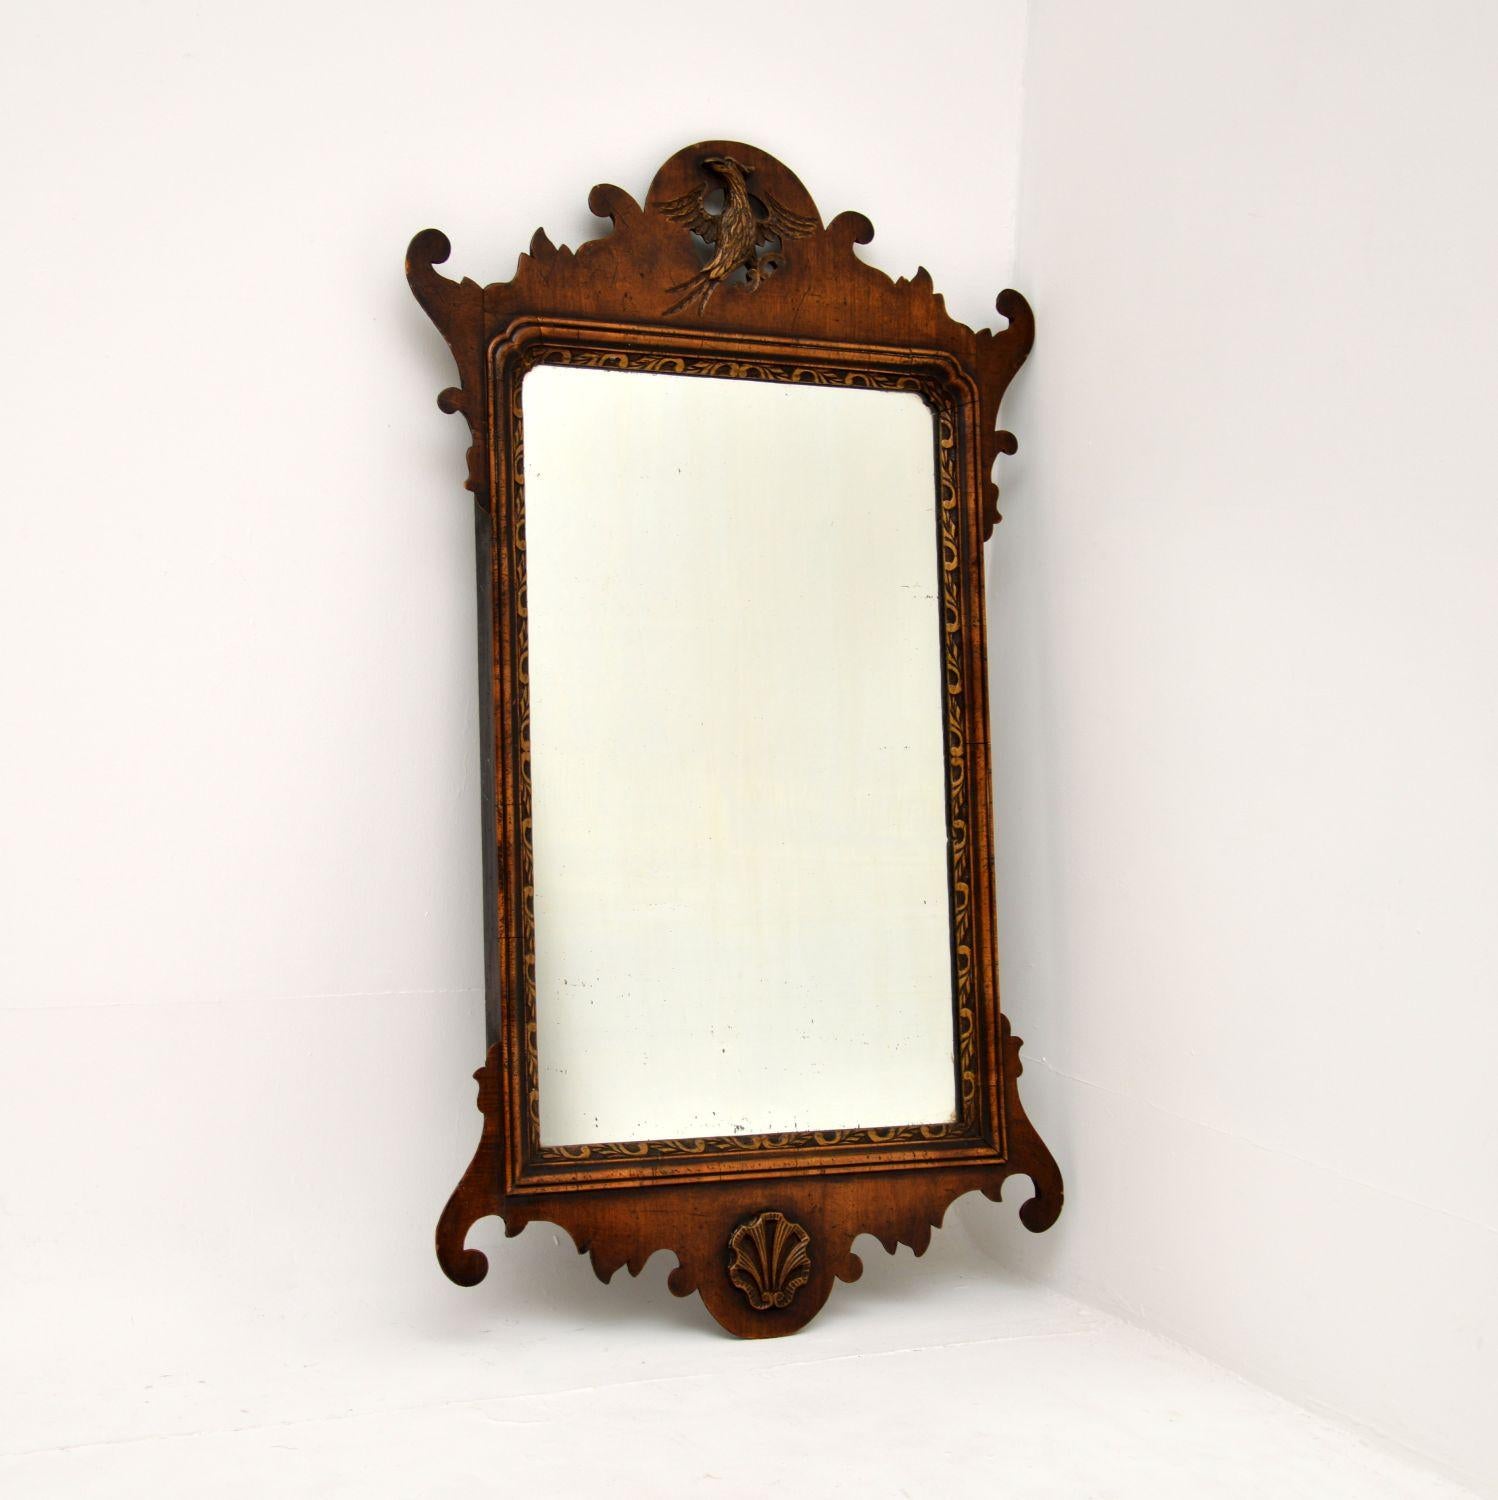 A stunning original antique Georgian period carved walnut mirror. This was made in England, it dates from around the 1790-1810 period.

It is beautifully designed and of amazing quality. The frame has fantastic, crisp carving throughout, including